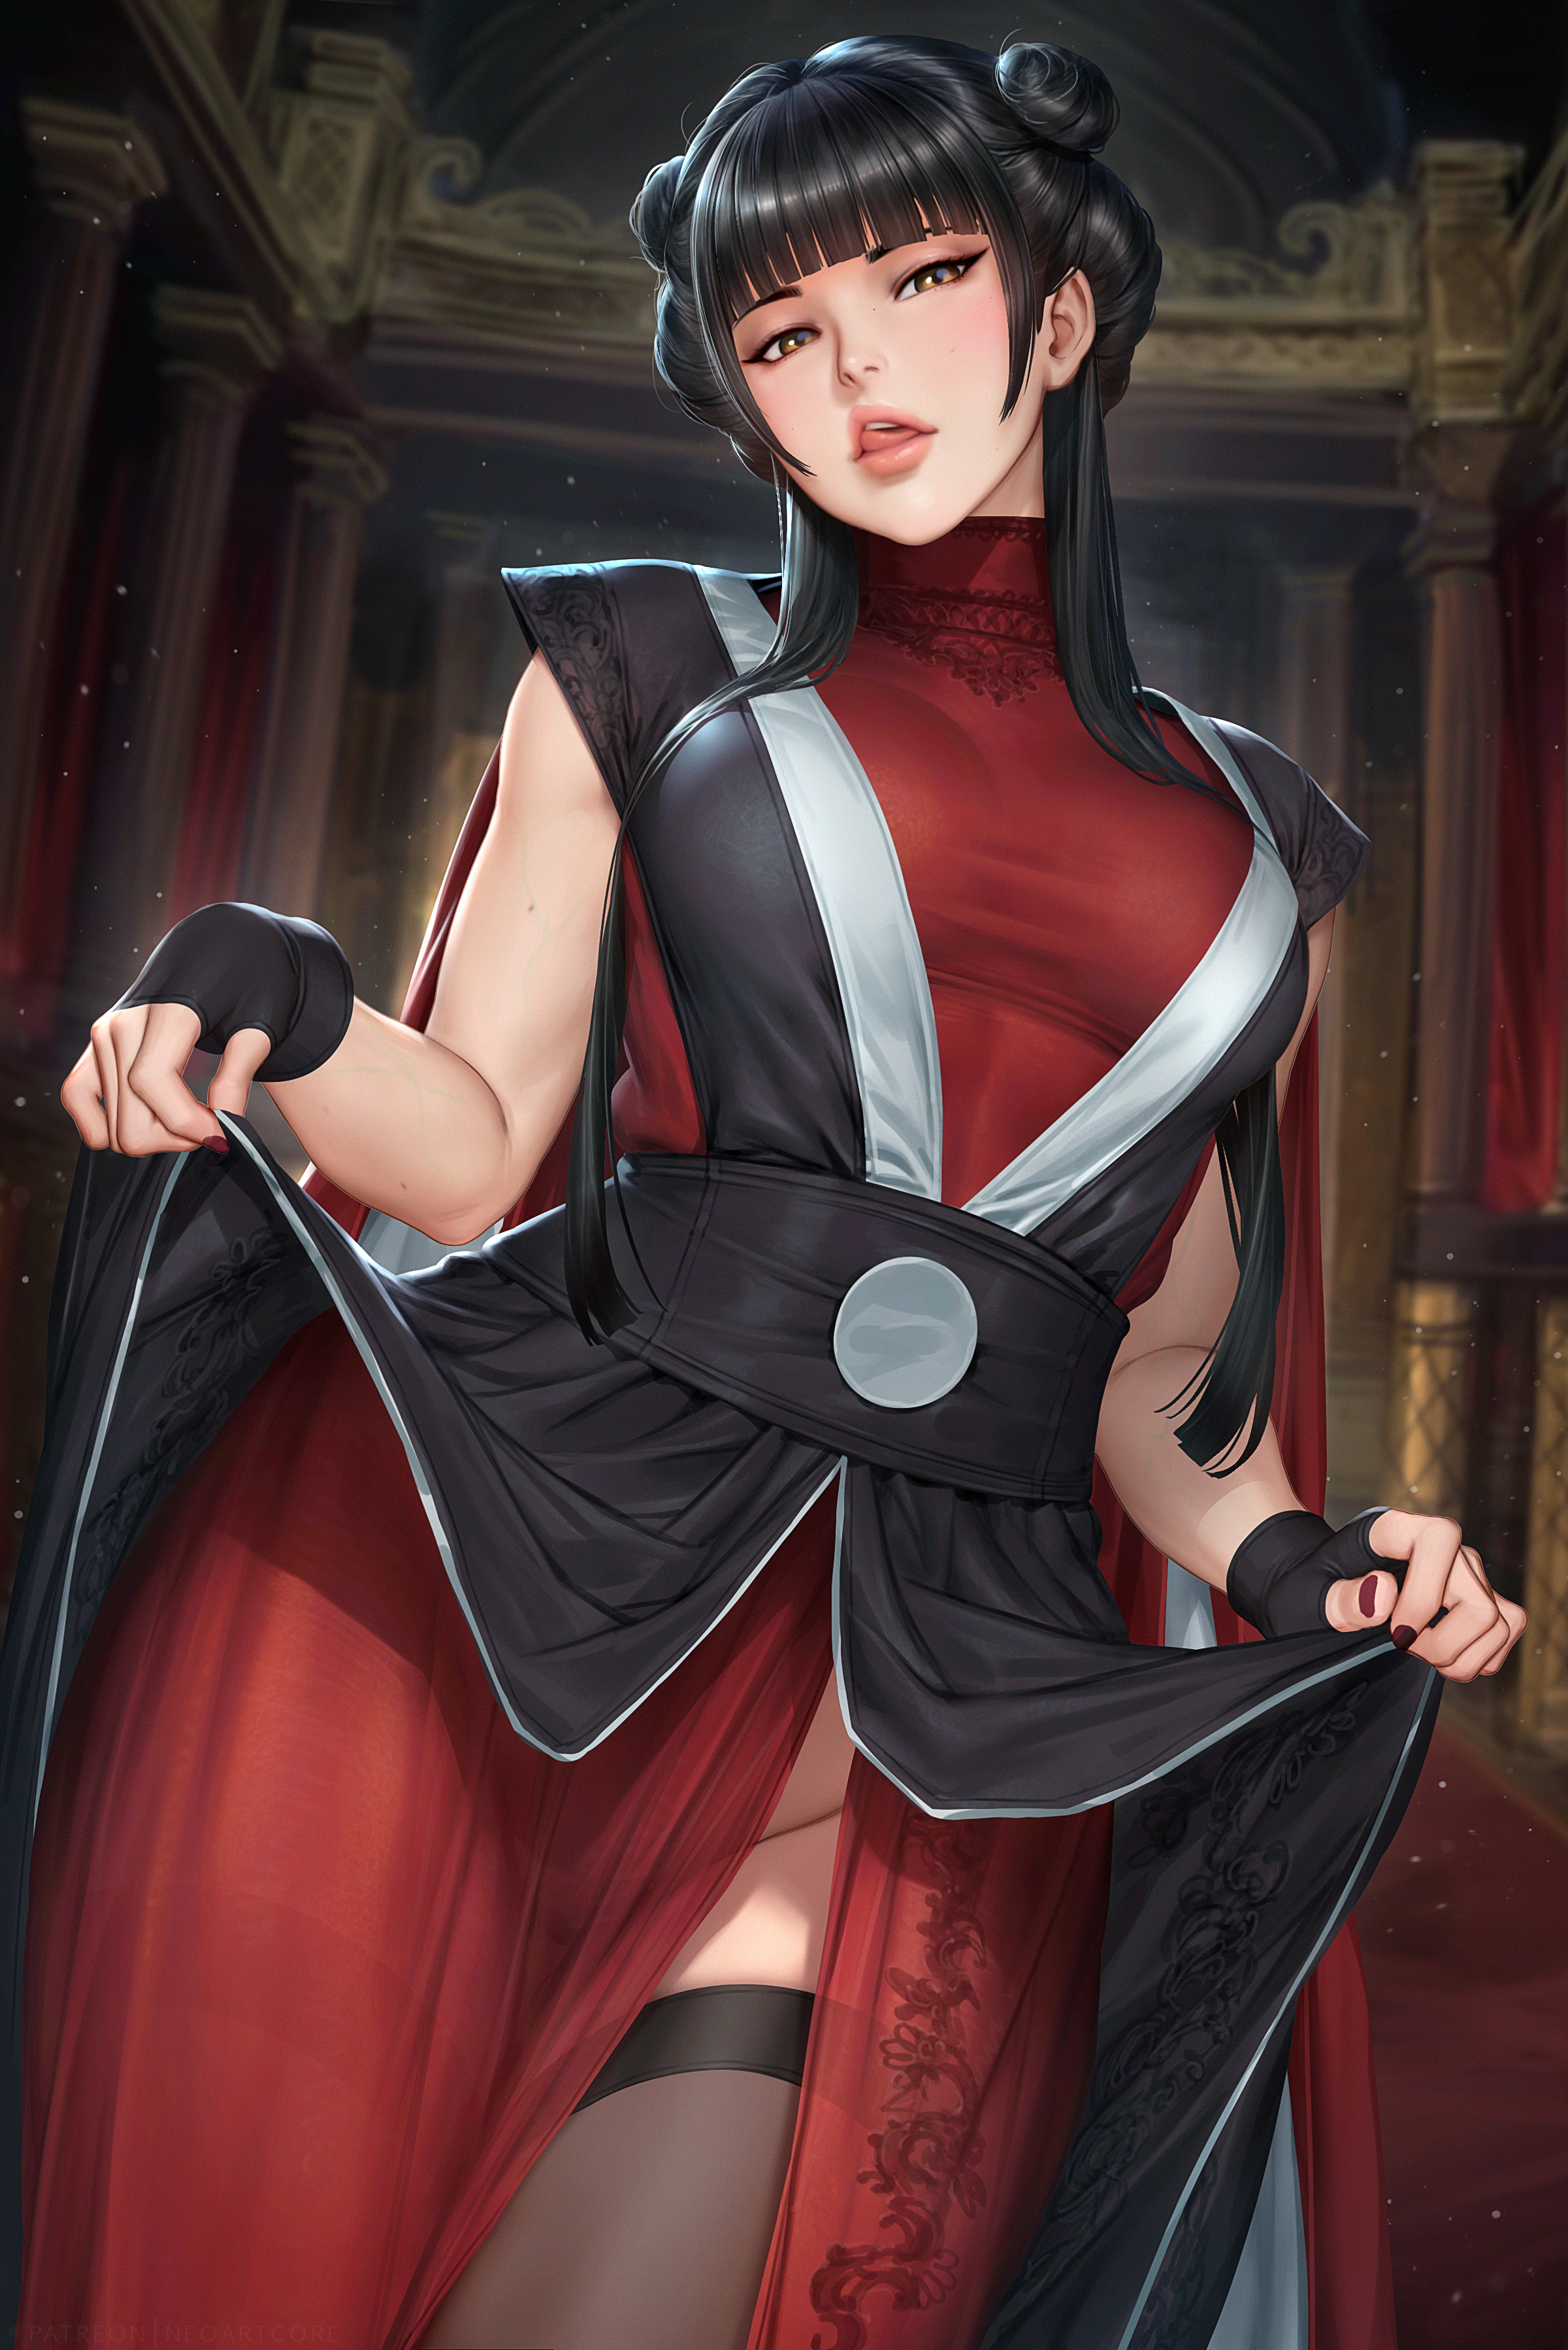 General 2400x3597 Avatar: The Last Airbender Mai (Avatar) animated character artwork drawing fan art portrait display 2D NeoArtCorE (artist) frontal view lifting clothes licking lips long hair black thigh highs standing looking at viewer tongues black hair yellow eyes gloves fingerless gloves big boobs thigh-highs red nails painted nails